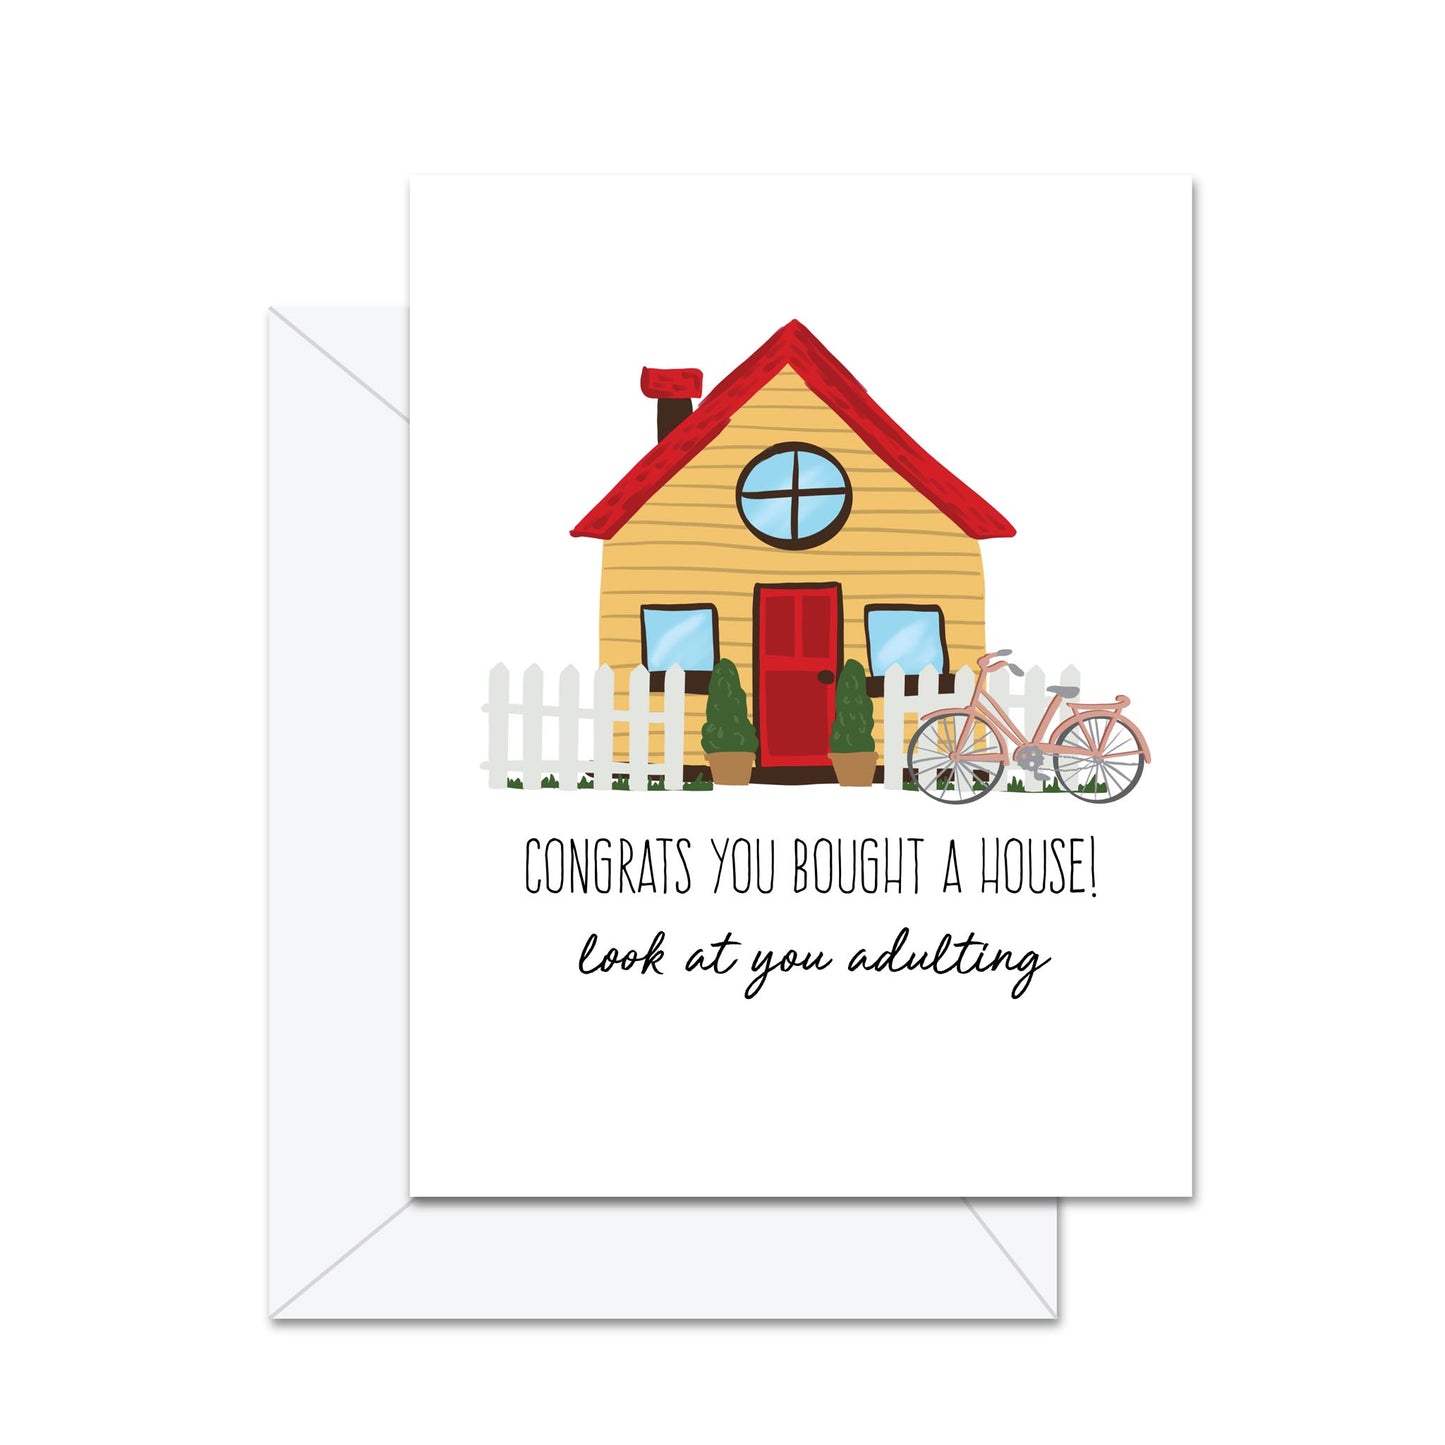 Congrats You Bought A House! - Greeting Card